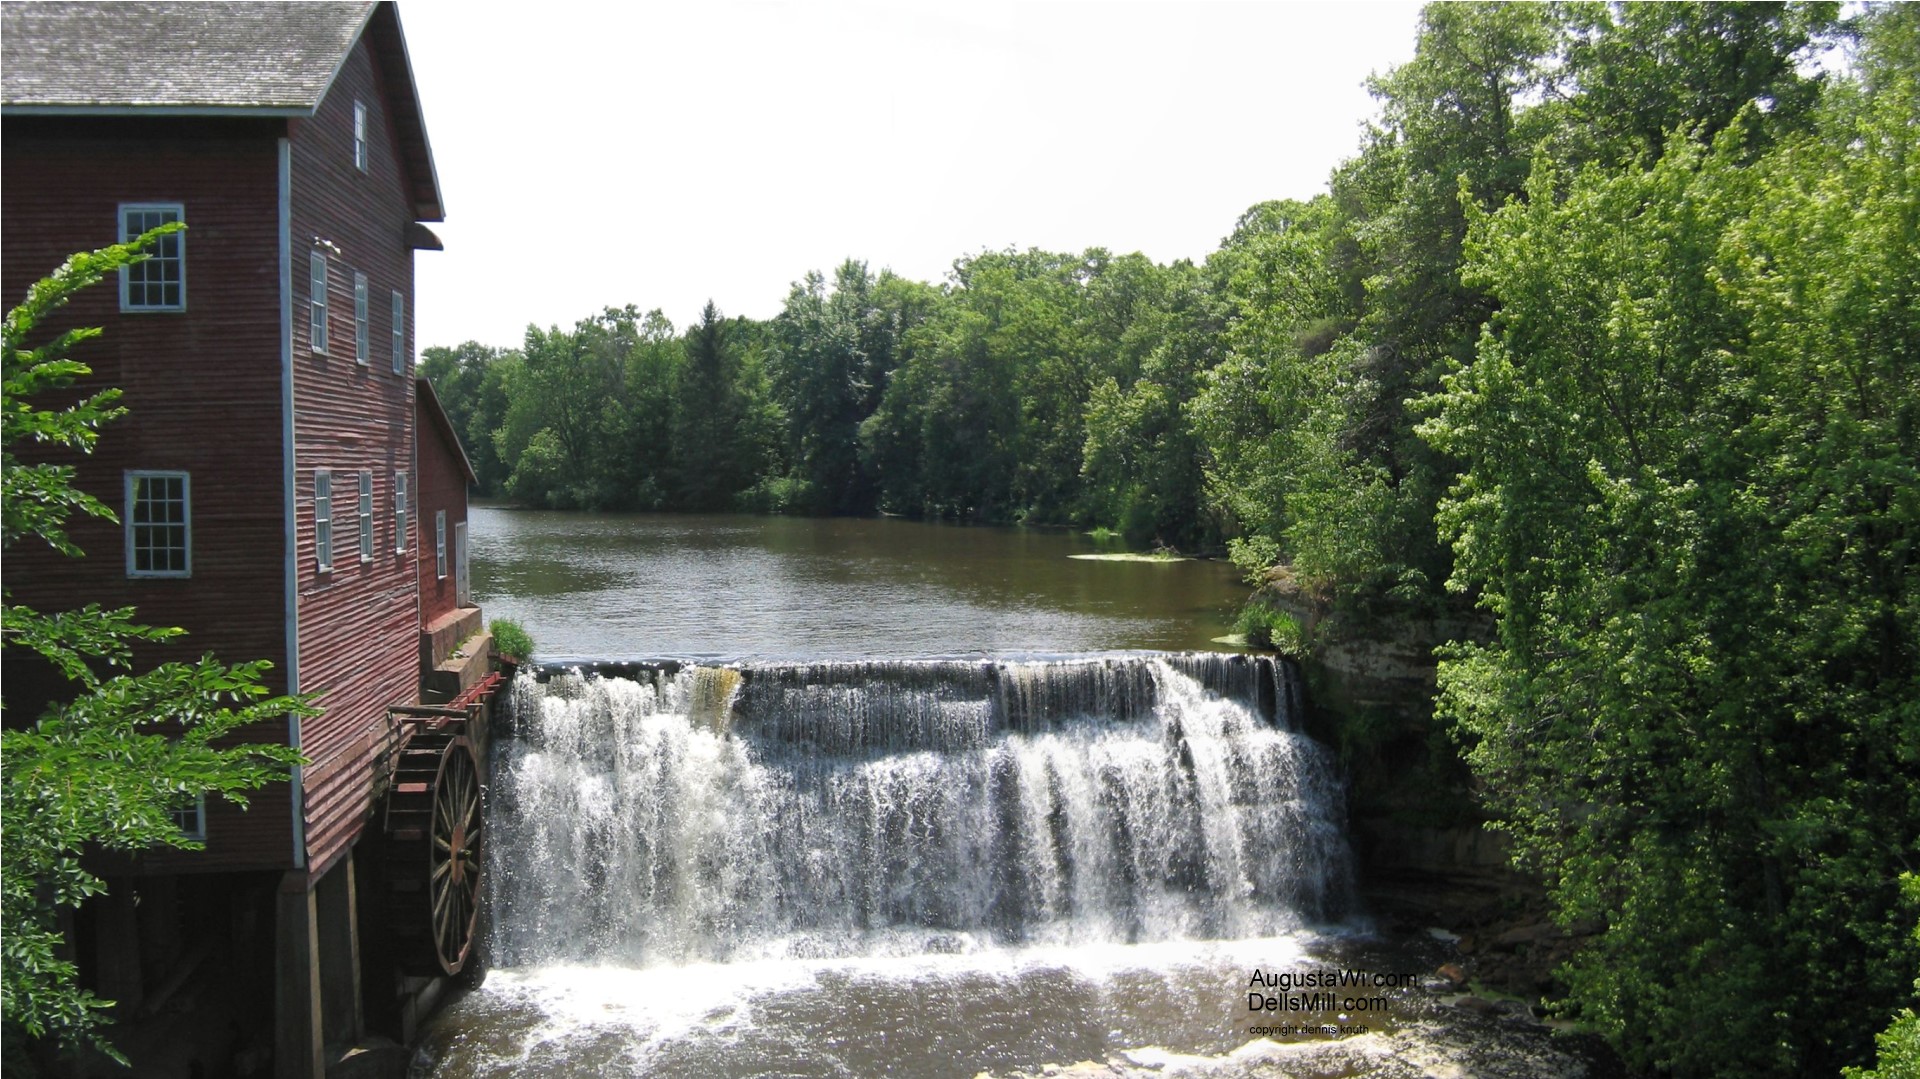 Background Of The Augusta Wisconsin Dells Mill For Your Puter